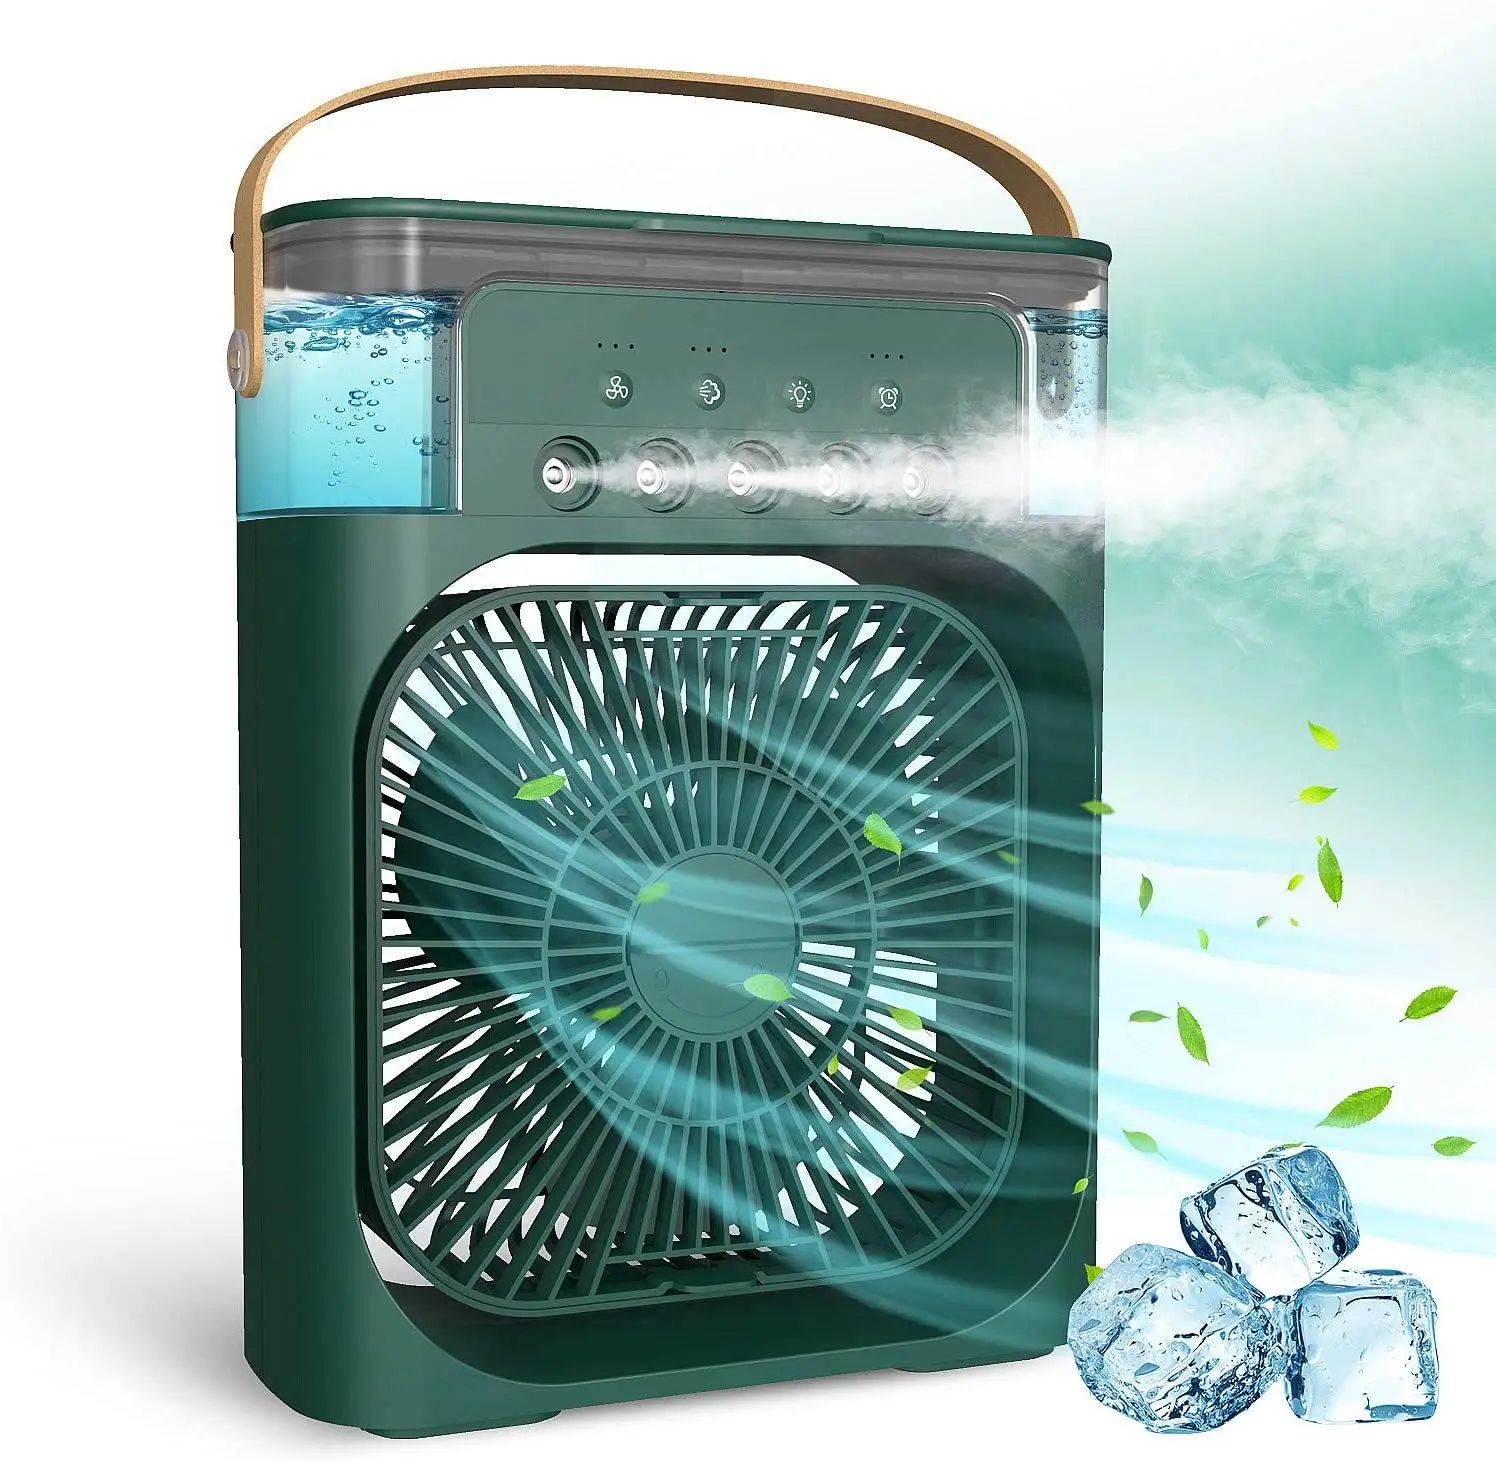 New best portable standing cooler fan Air conditioner fan